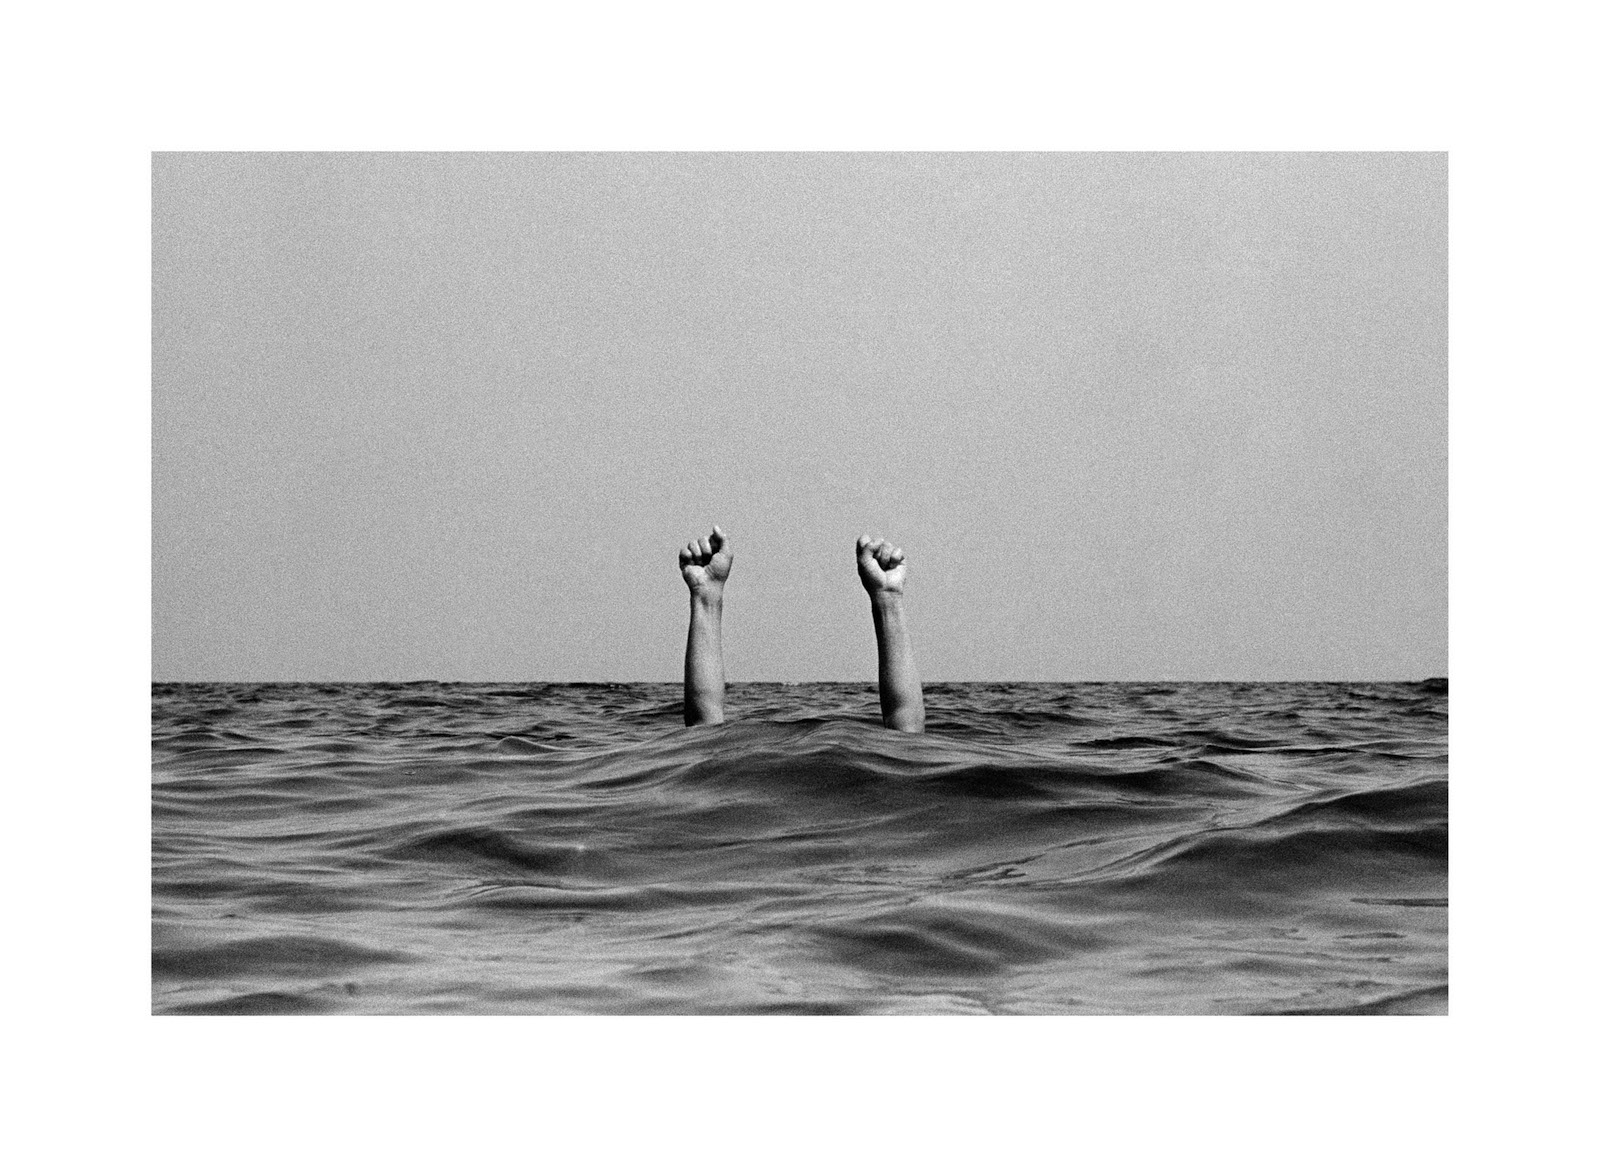 Nothing about drowning, 1985